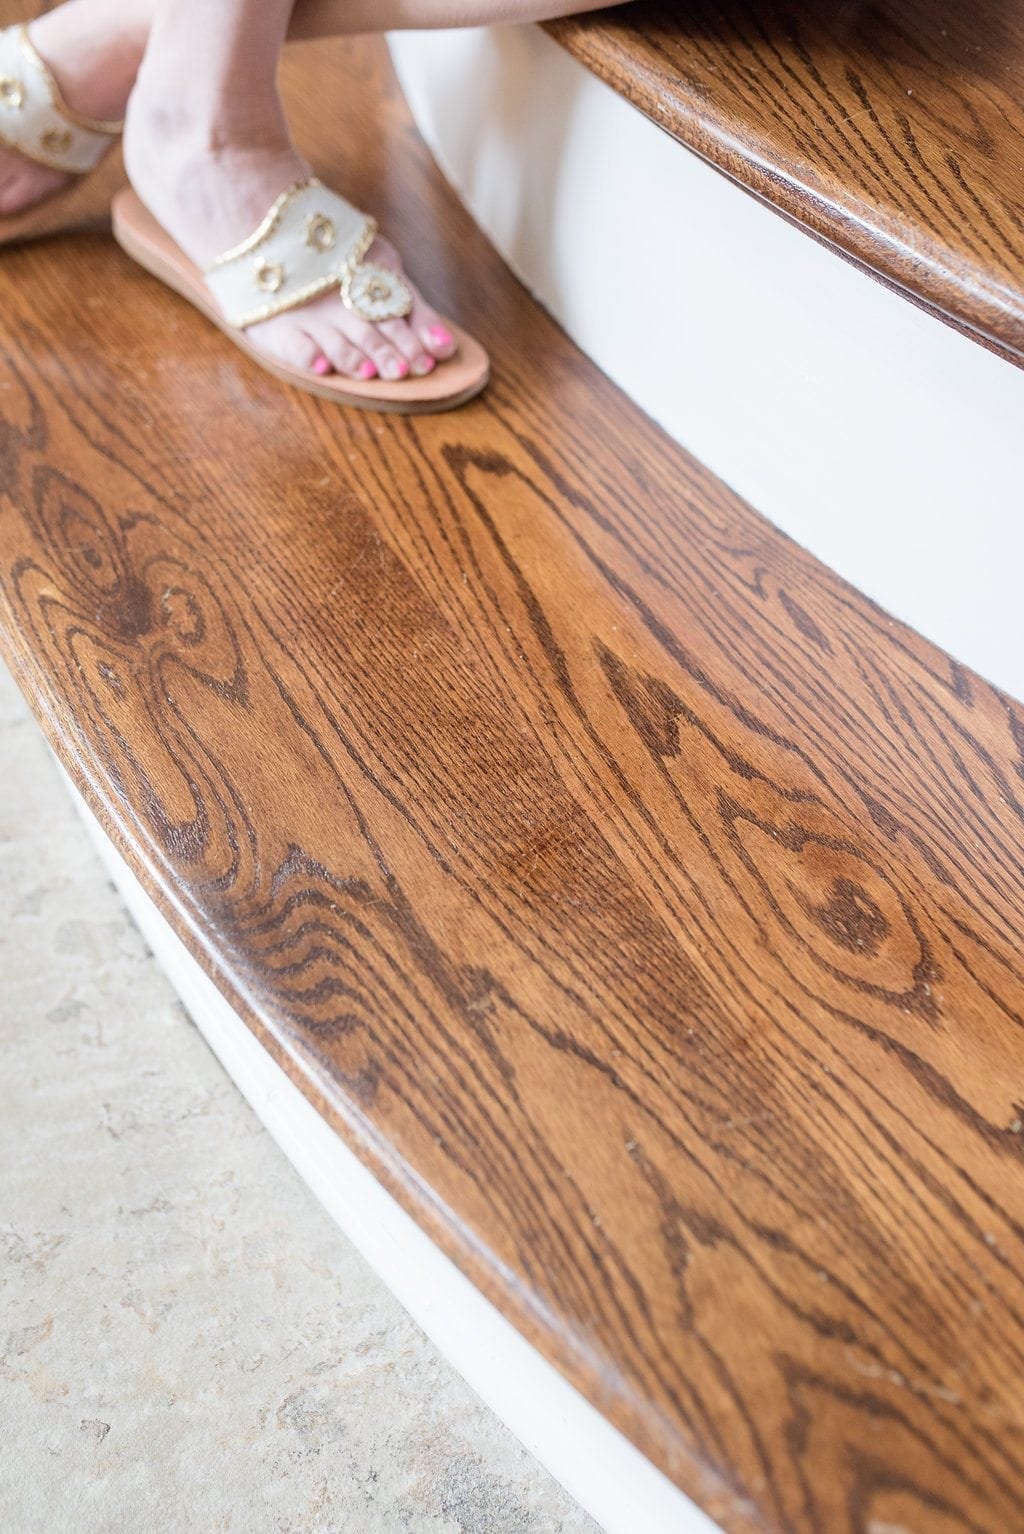 Fixing and cleaning scratches in your wood floors and wood furniture.